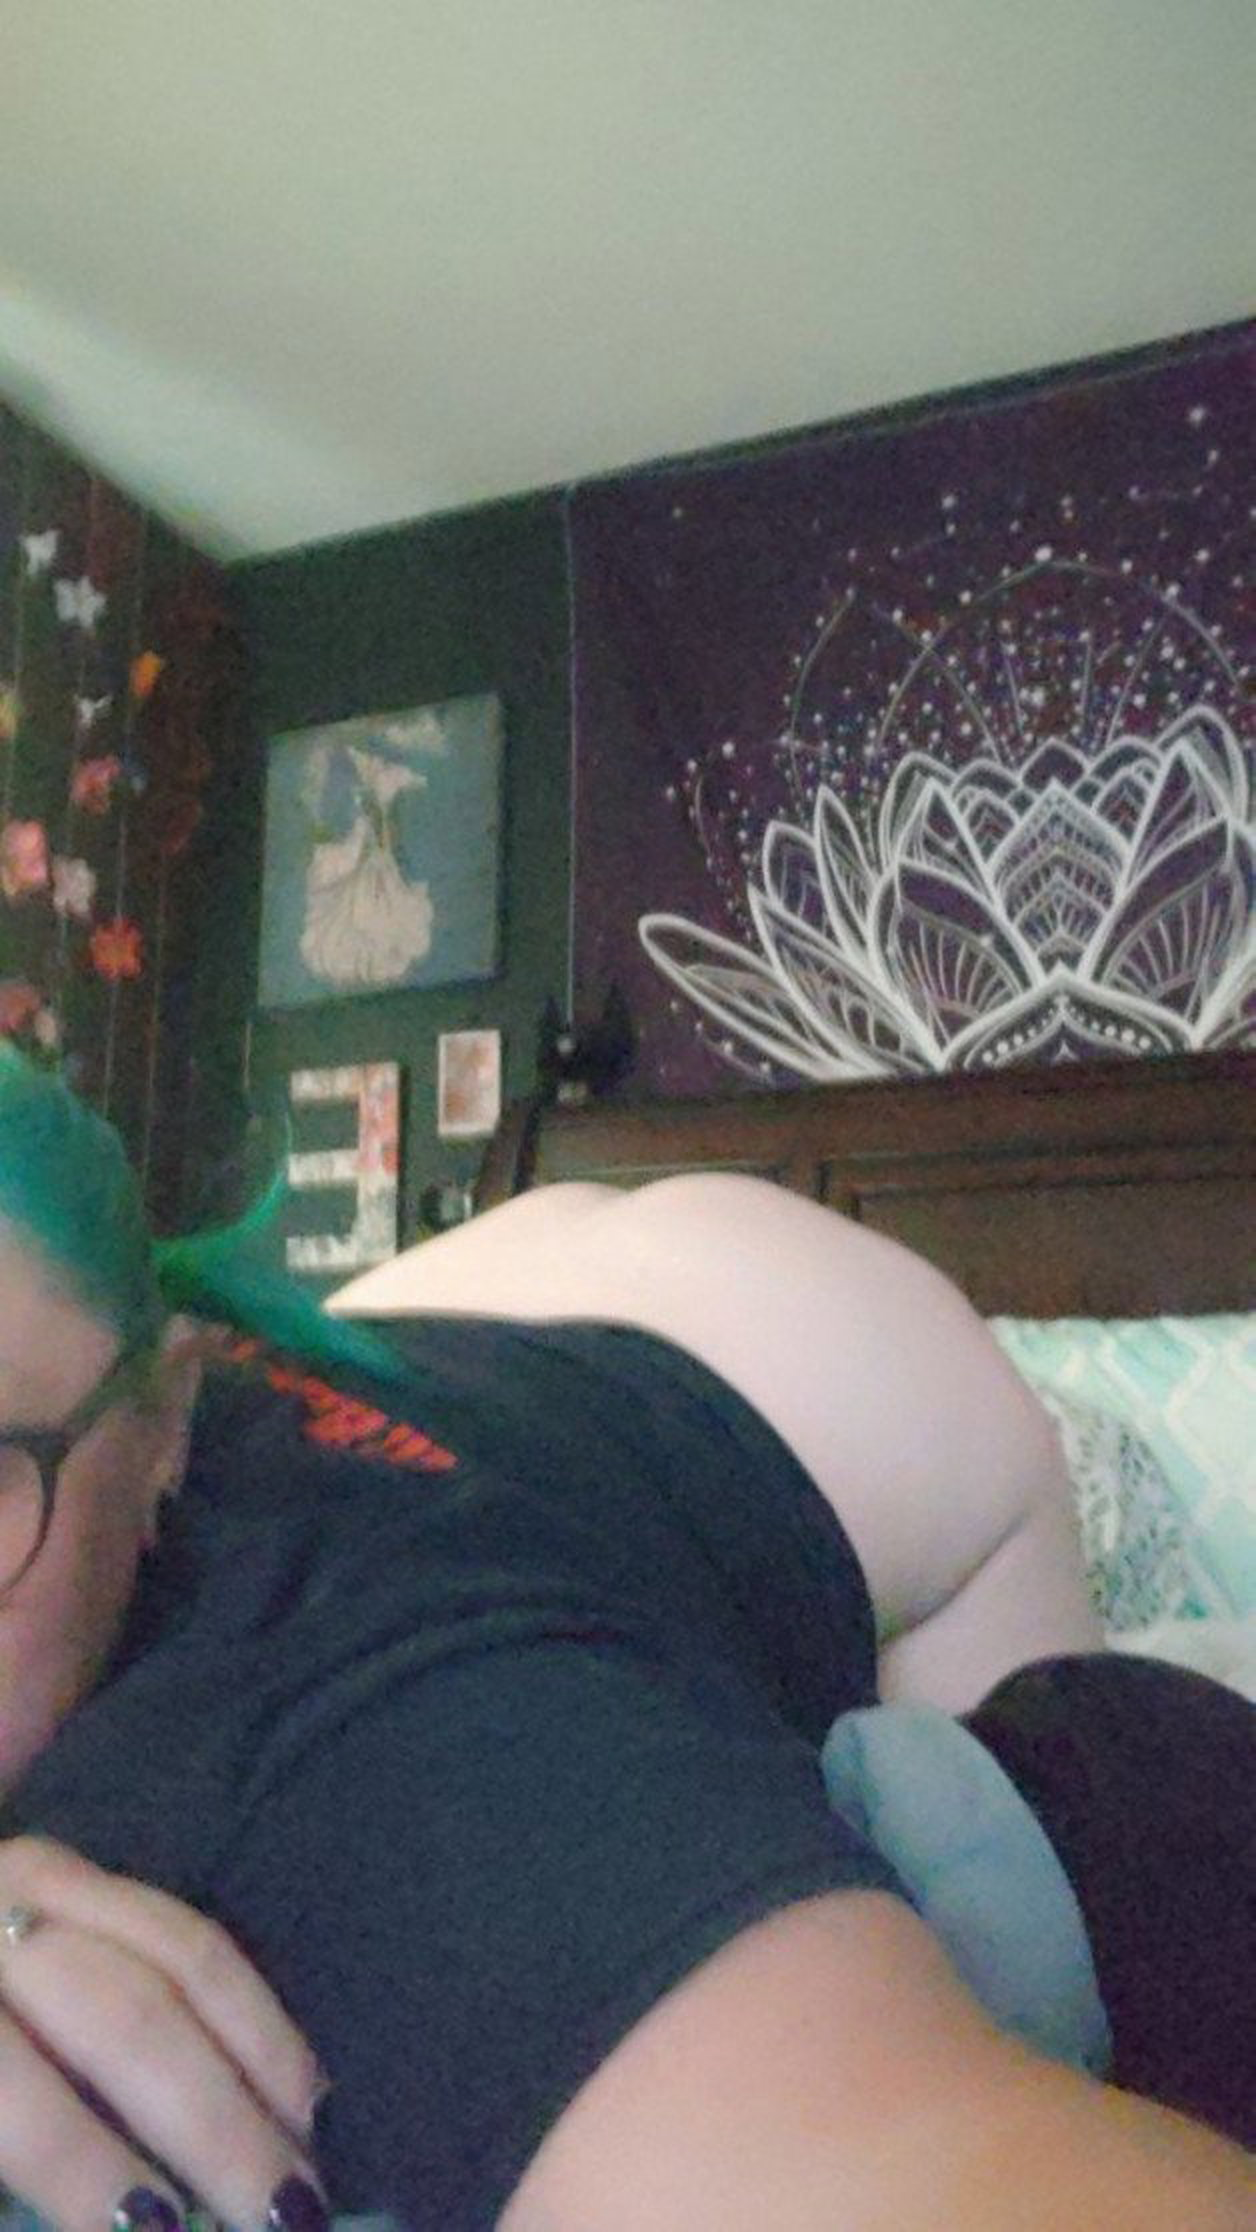 Watch the Photo by Skittlepop6 with the username @Skittlepop6, who is a verified user, posted on June 24, 2023. The post is about the topic Sexy BBWs. and the text says 'I'm Ready to be toyed with. 😏😏
https://onlyfans.com/skittlepop3624
#BBW #Doggystyle #tease #lgbtq #onlyfans #assplay #daddysgirl #goodgirl #switch #brat #chubbybunny #altgirl #gothgirl #praisekink'